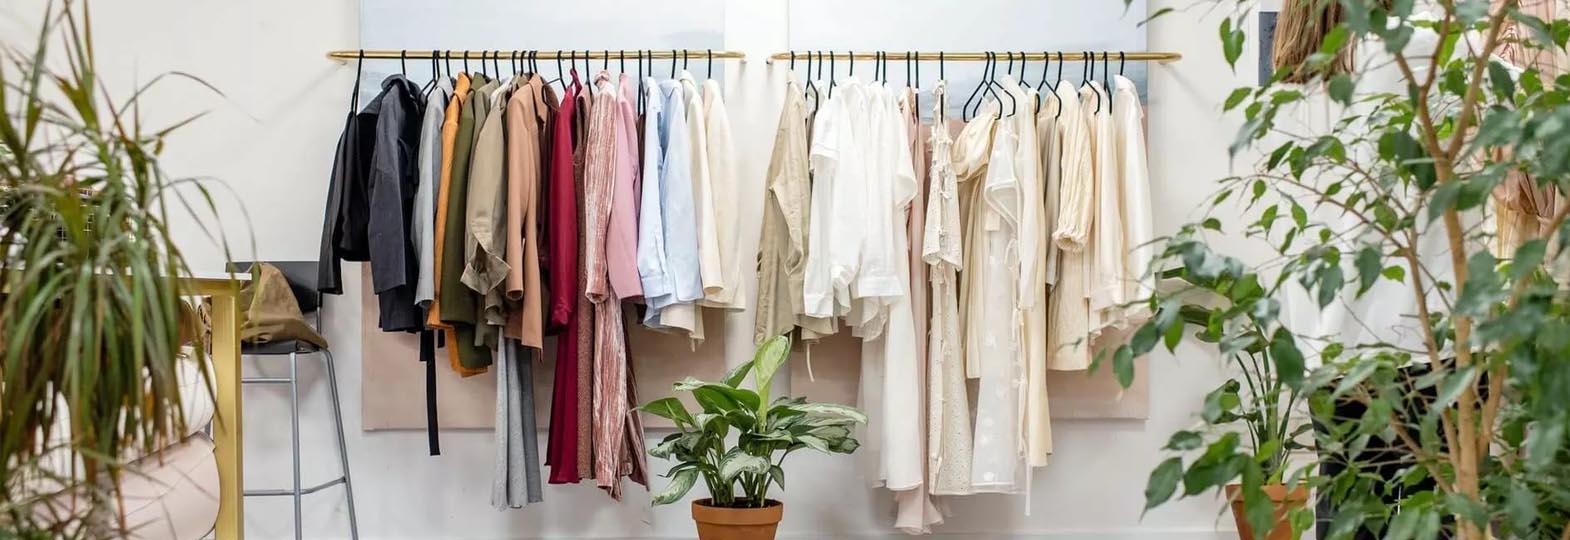 Sustainable Fashion Advice for Creating an Eco-friendly Wardrobe ...